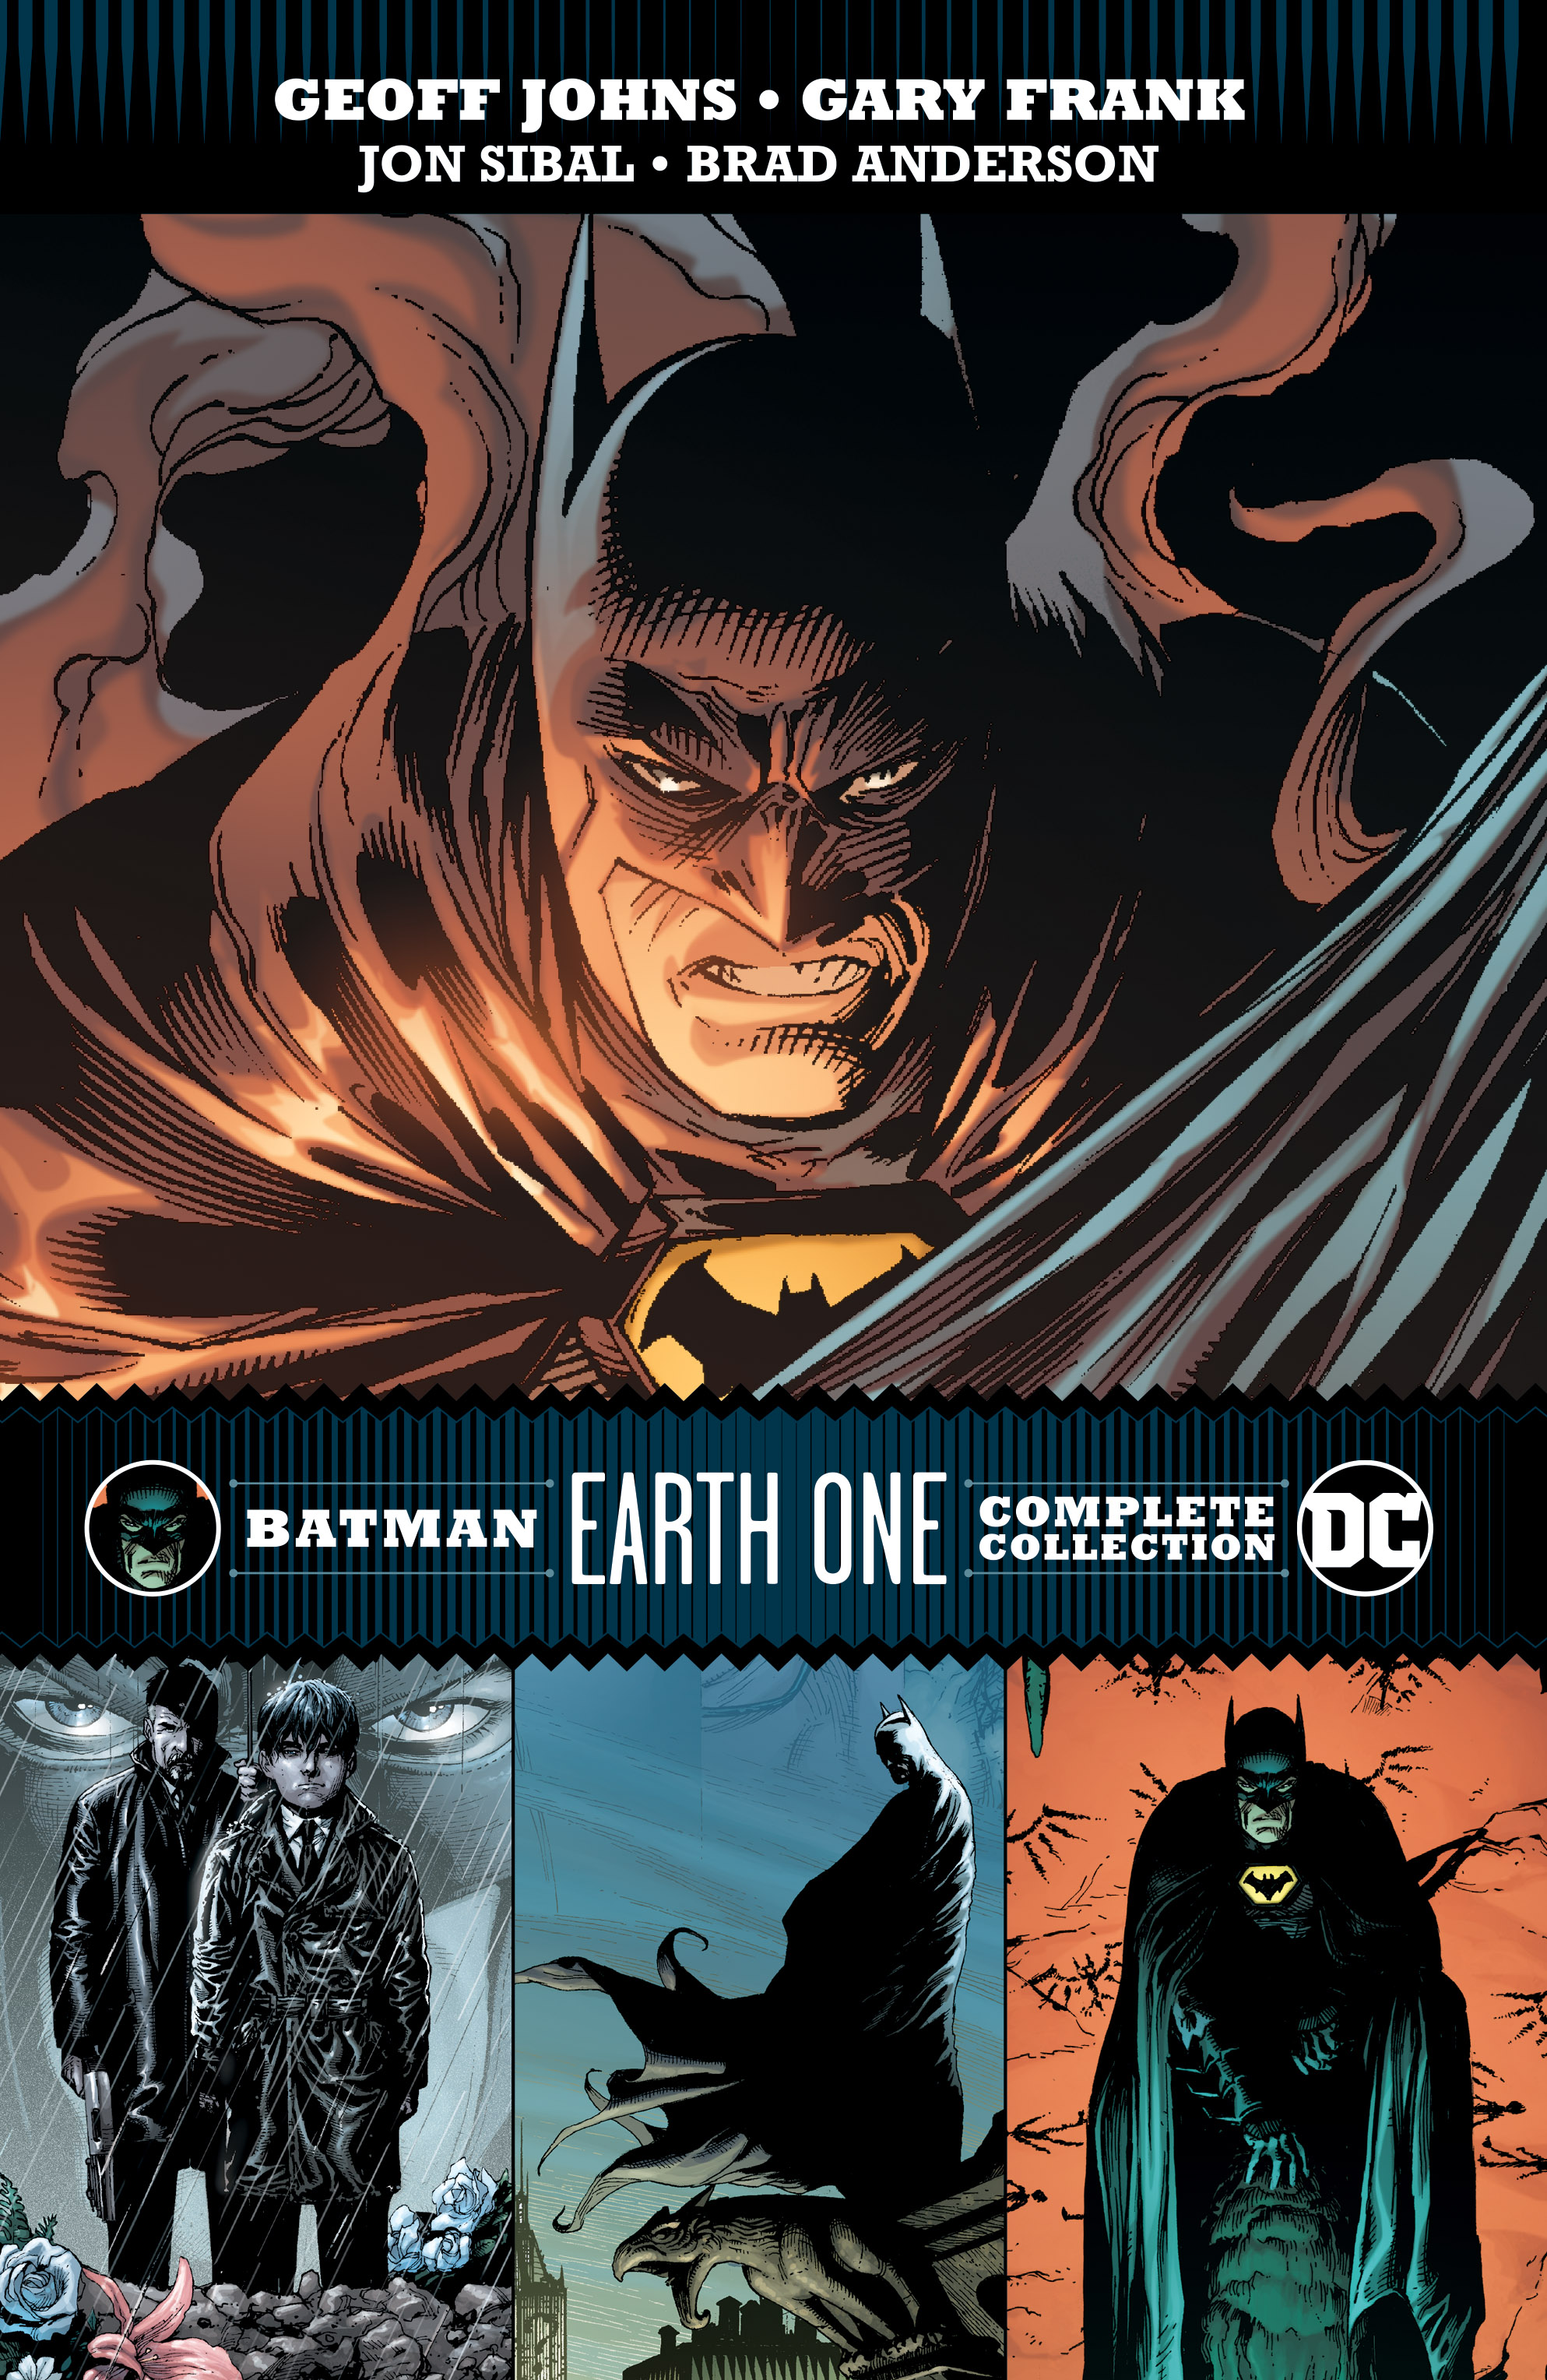 Cape and Cowl Comics - Batman Earth One Complete Collection Graphic Novel